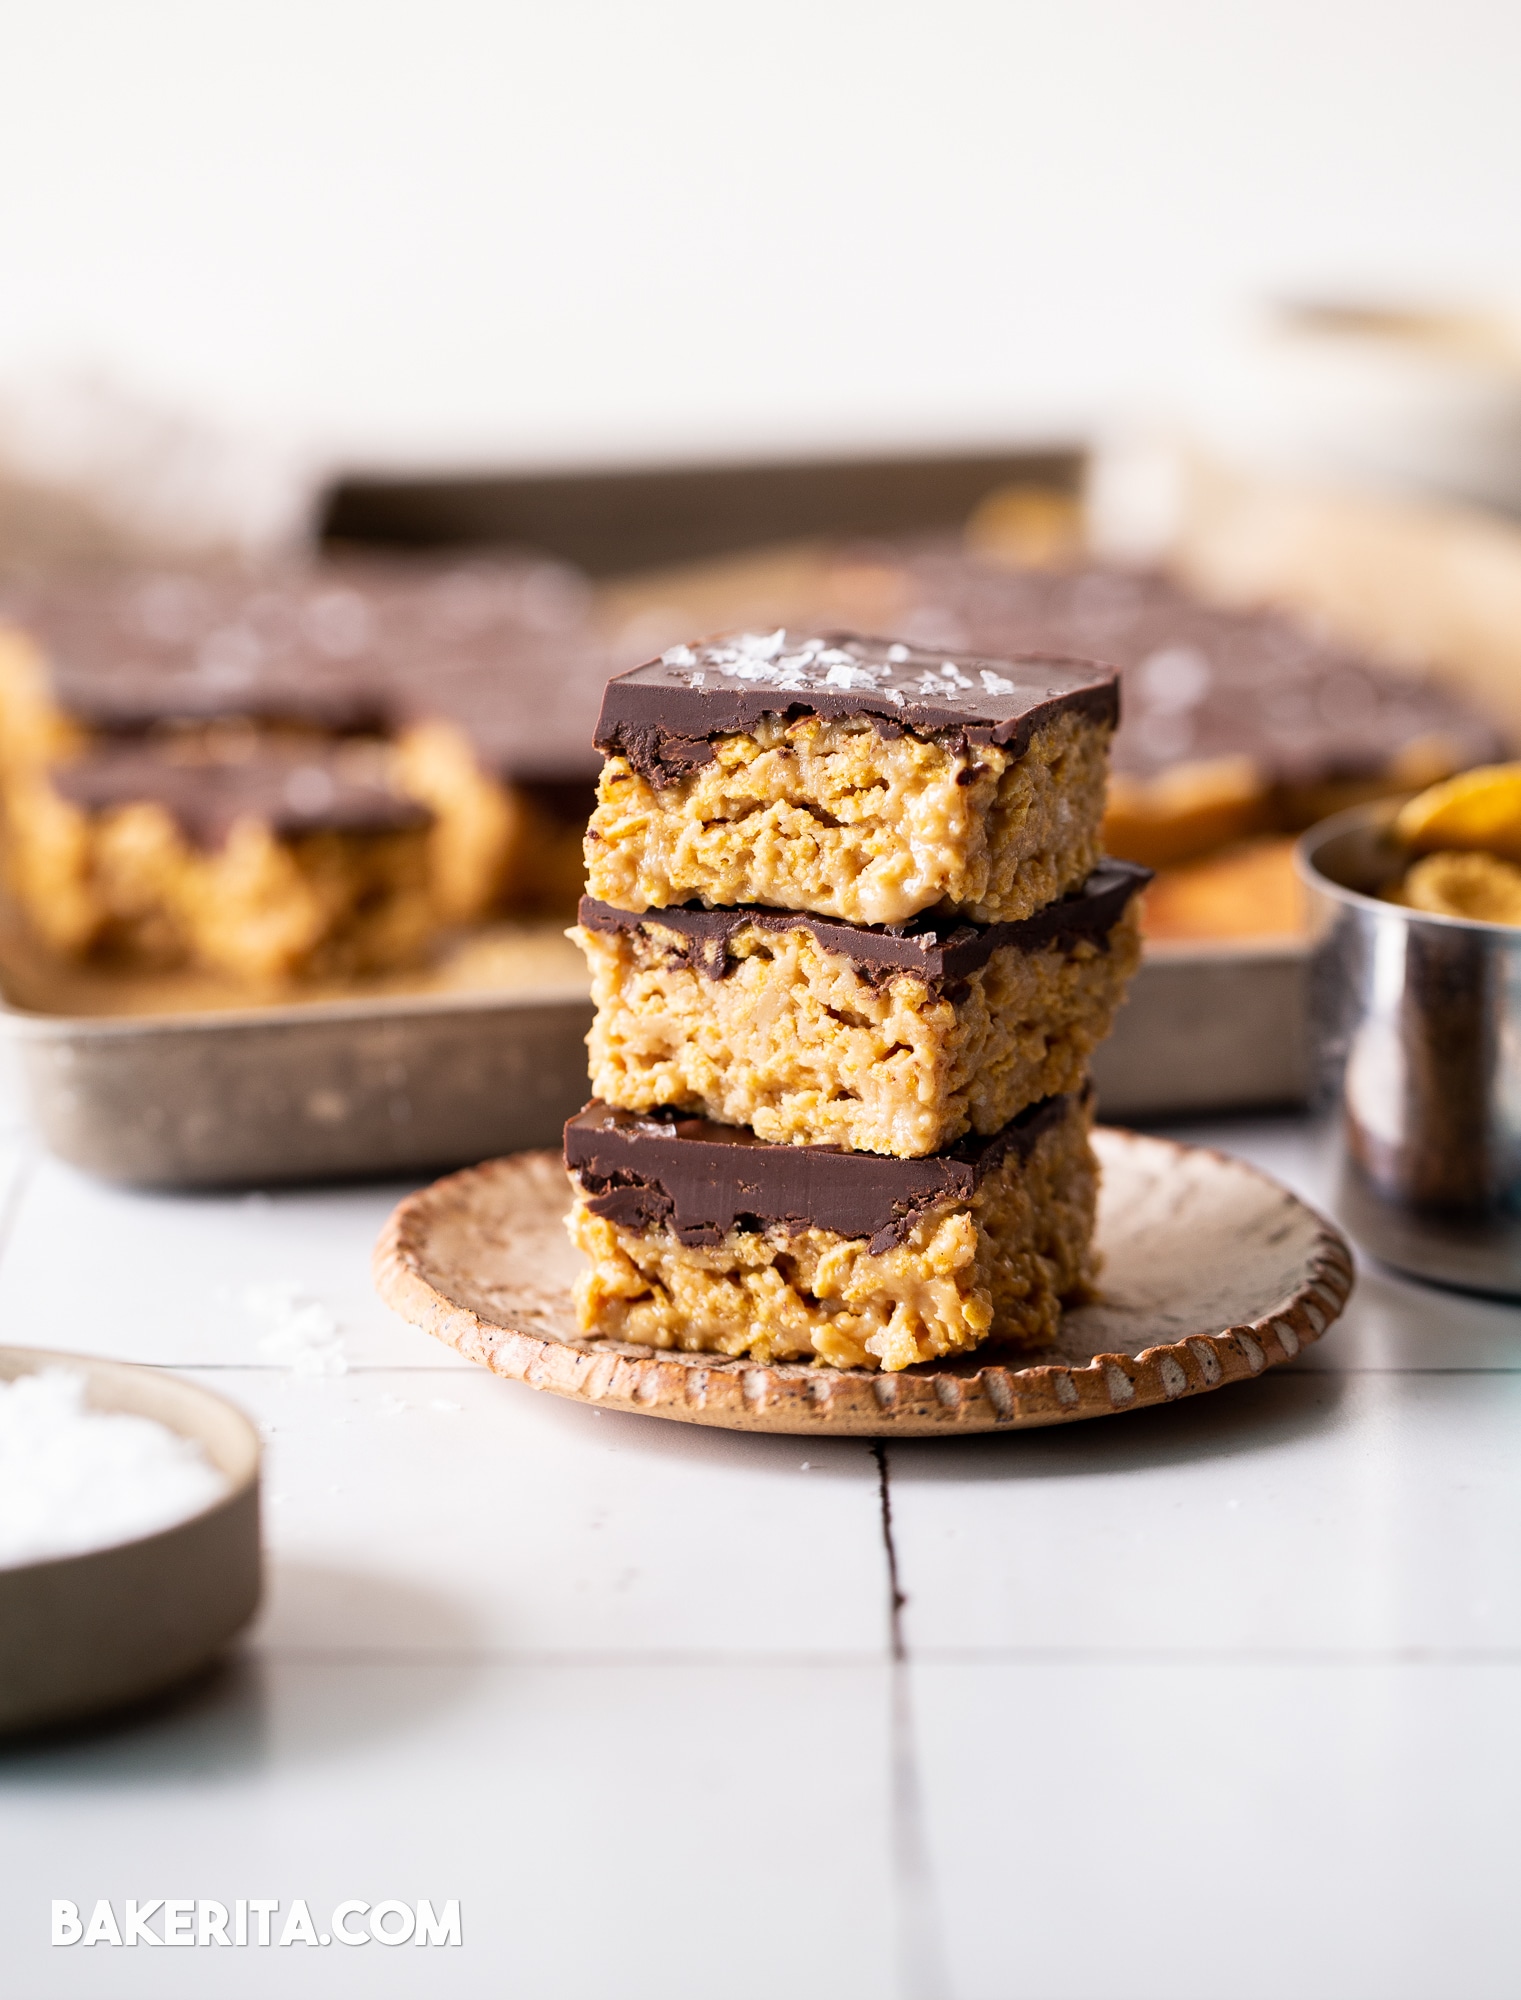 These Easy Peanut Butter Cornflakes Bars are naturally gluten-free, vegan, and absolutely irresistible. They're quick and simple to make, and can be made using your favorite nut or seed butter if you need a peanut-free or nut-free option. 